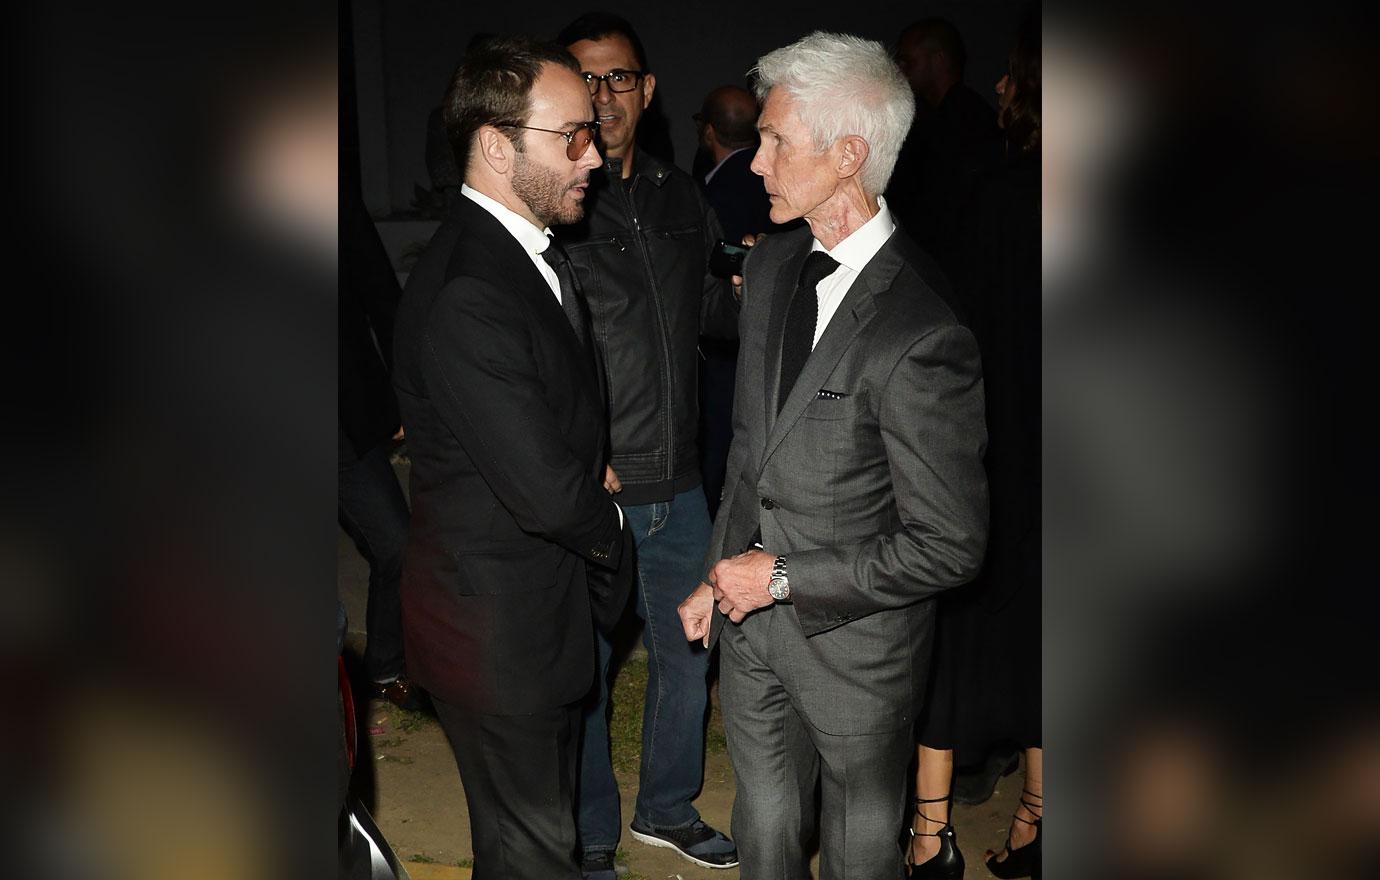 Tom Ford's husband, journalist Richard Buckley, dies aged 72 - Queerty